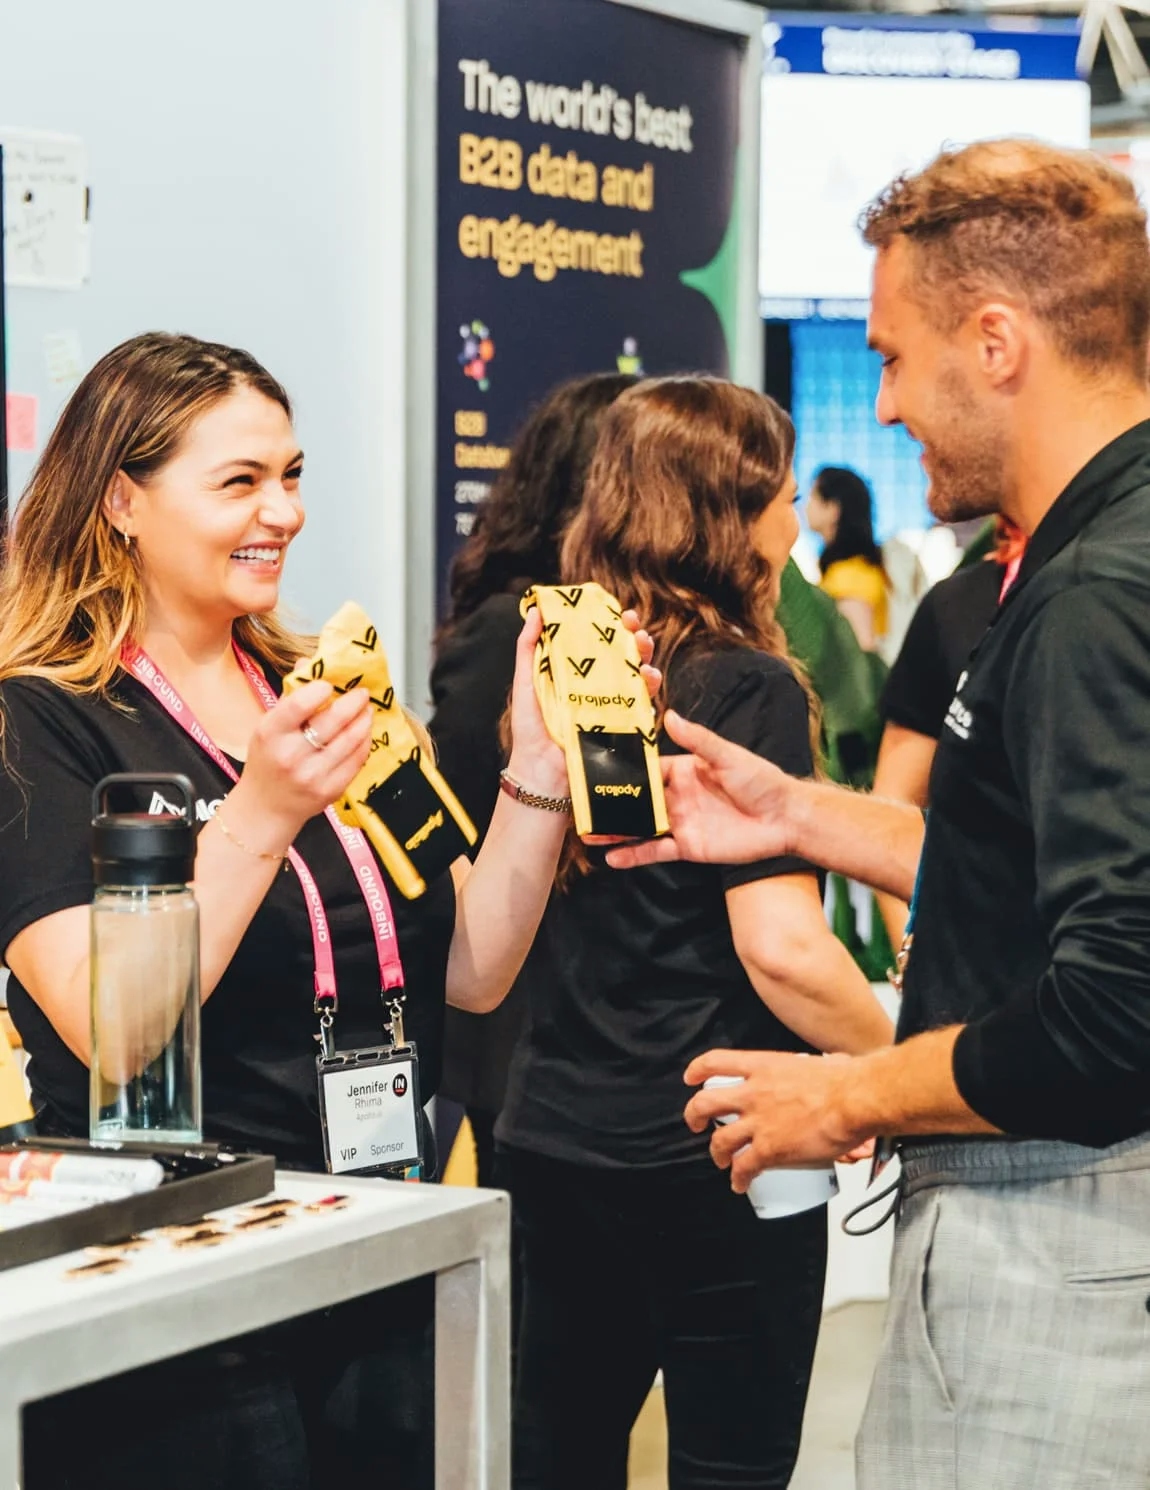 An image of a woman business representative showing off branded merchandise to a male INBOUND attendee